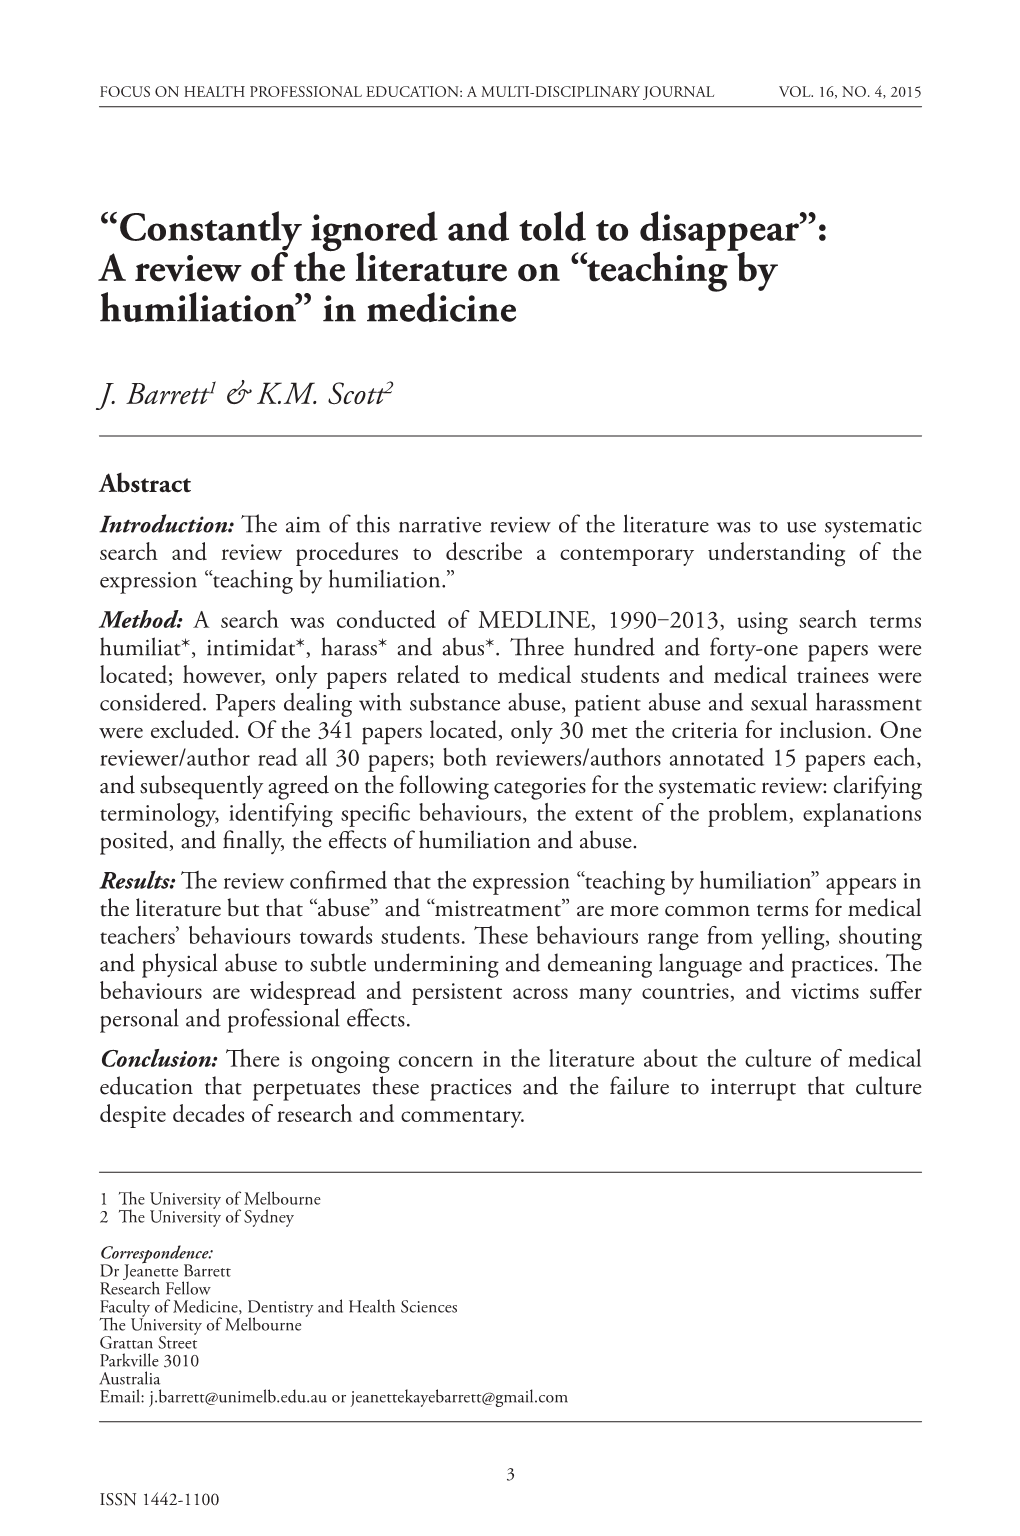 “Teaching by Humiliation” in Medicine